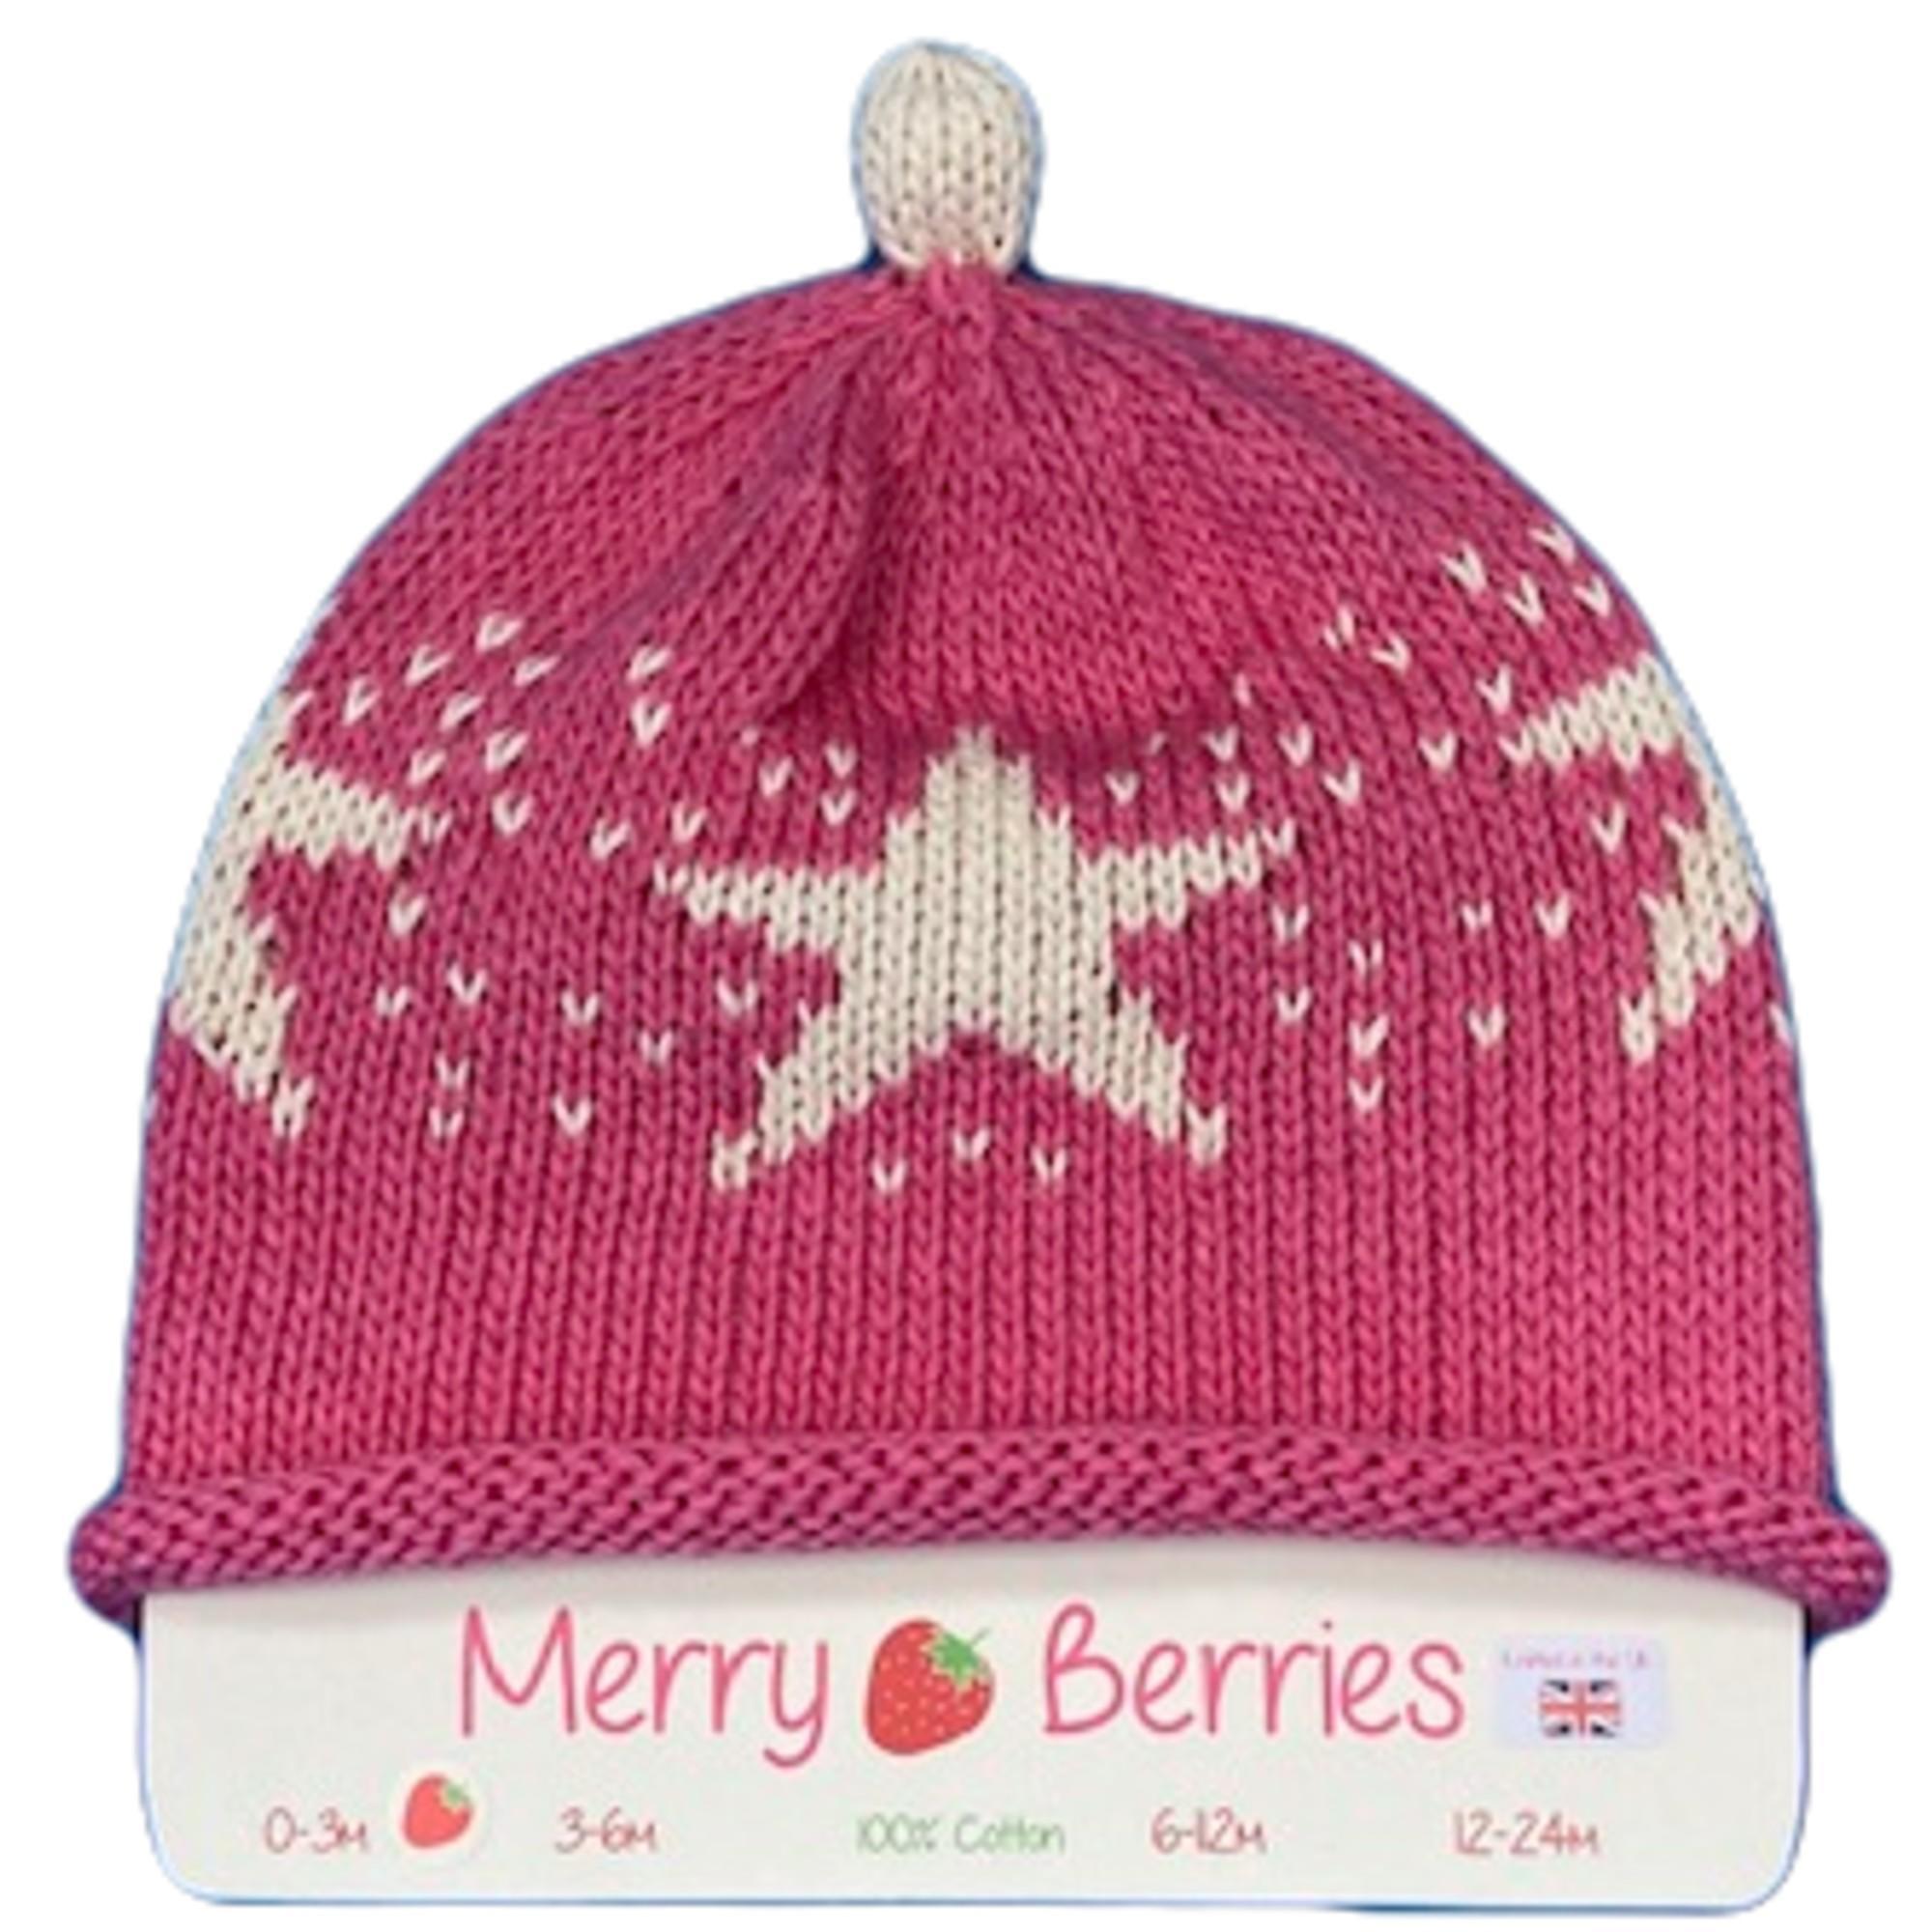 Merry Berries - Candy Star Knitted baby Hat-0-24mths-Cotton